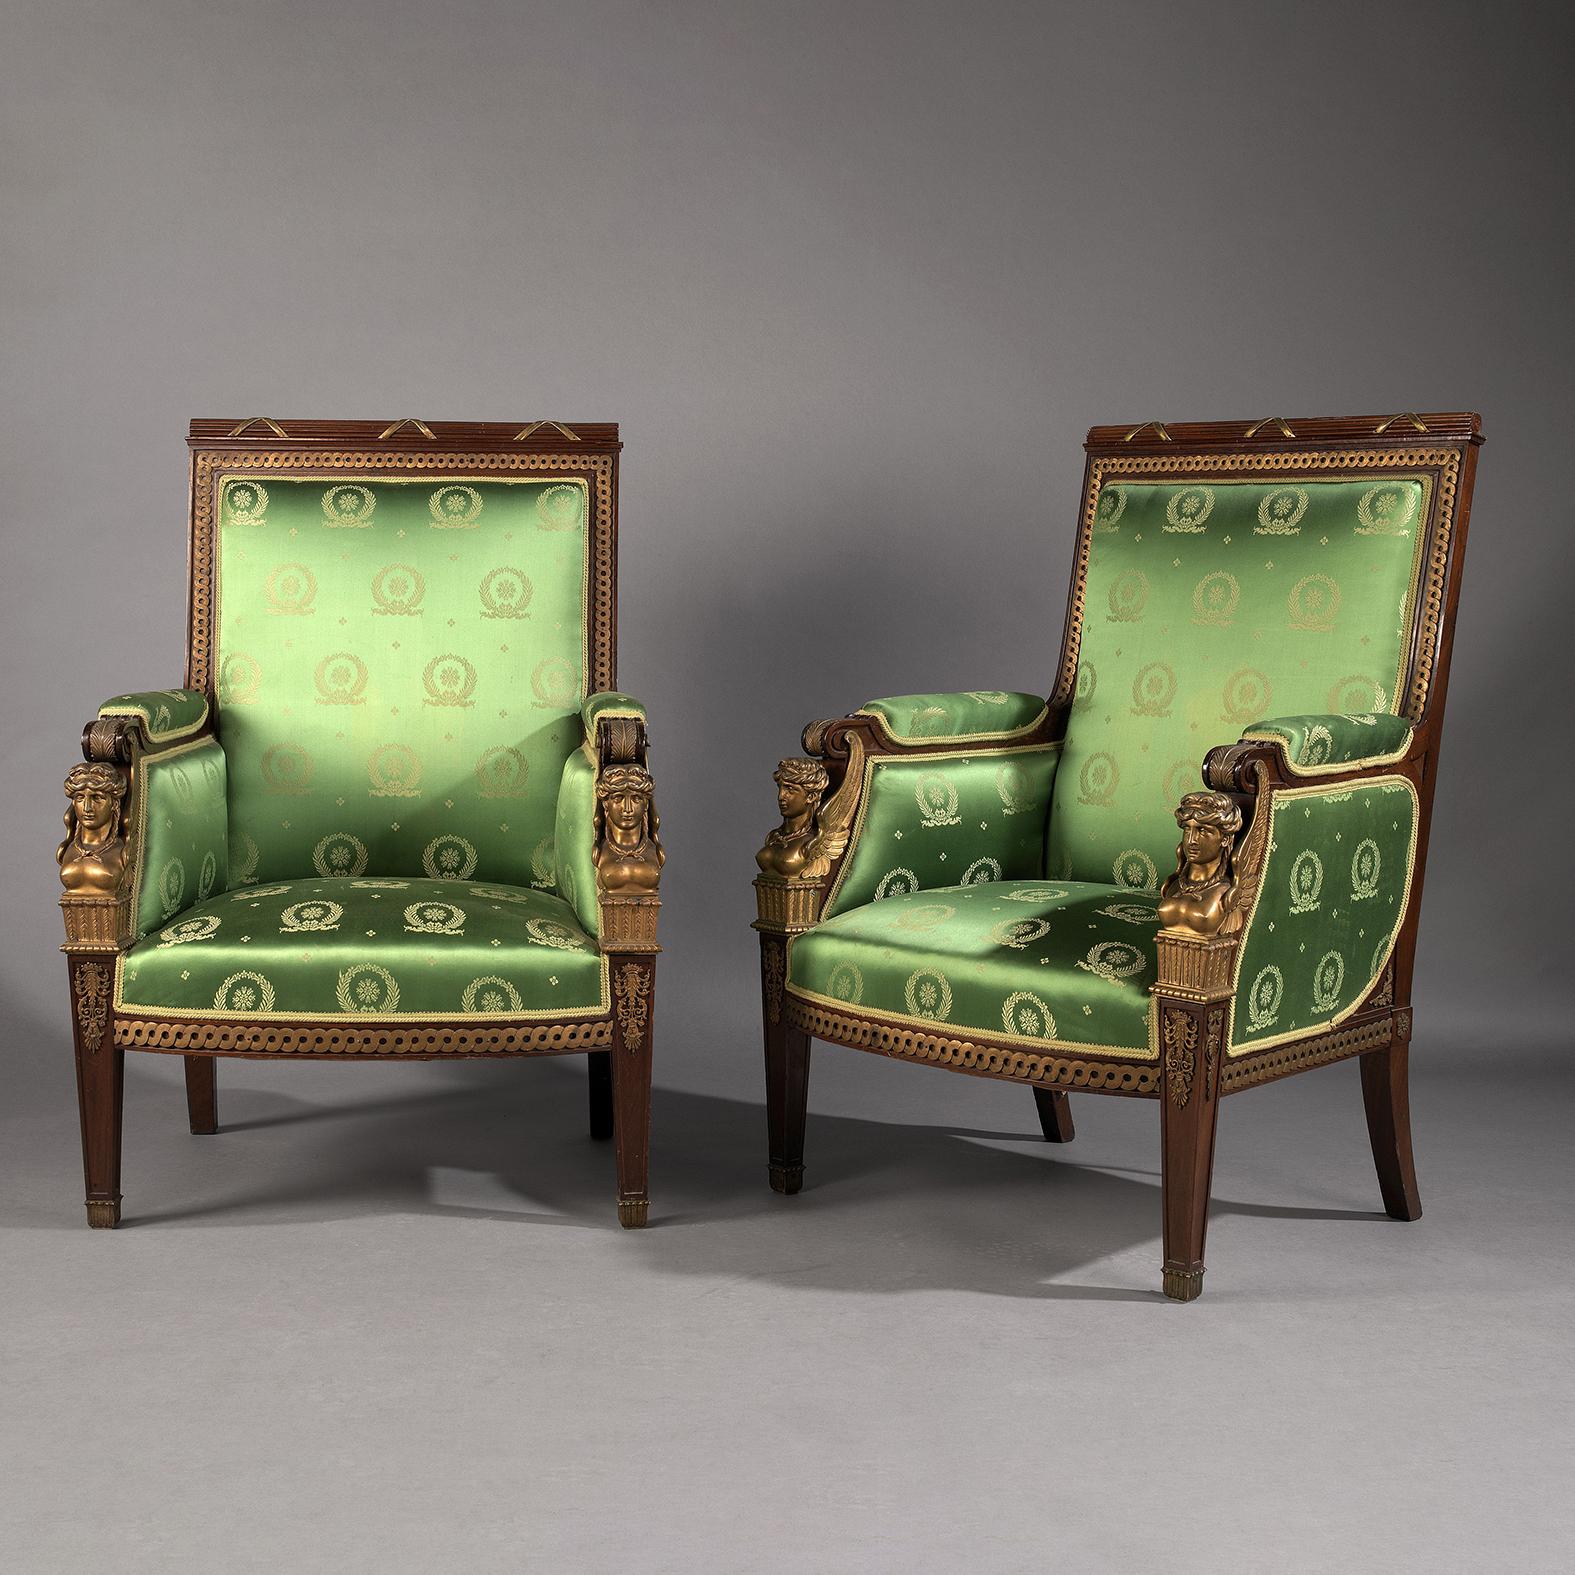 19th Century Pair of Empire Style Mahogany & Gilt-Bronze Bergères, Manner of Jacob-Desmalter For Sale